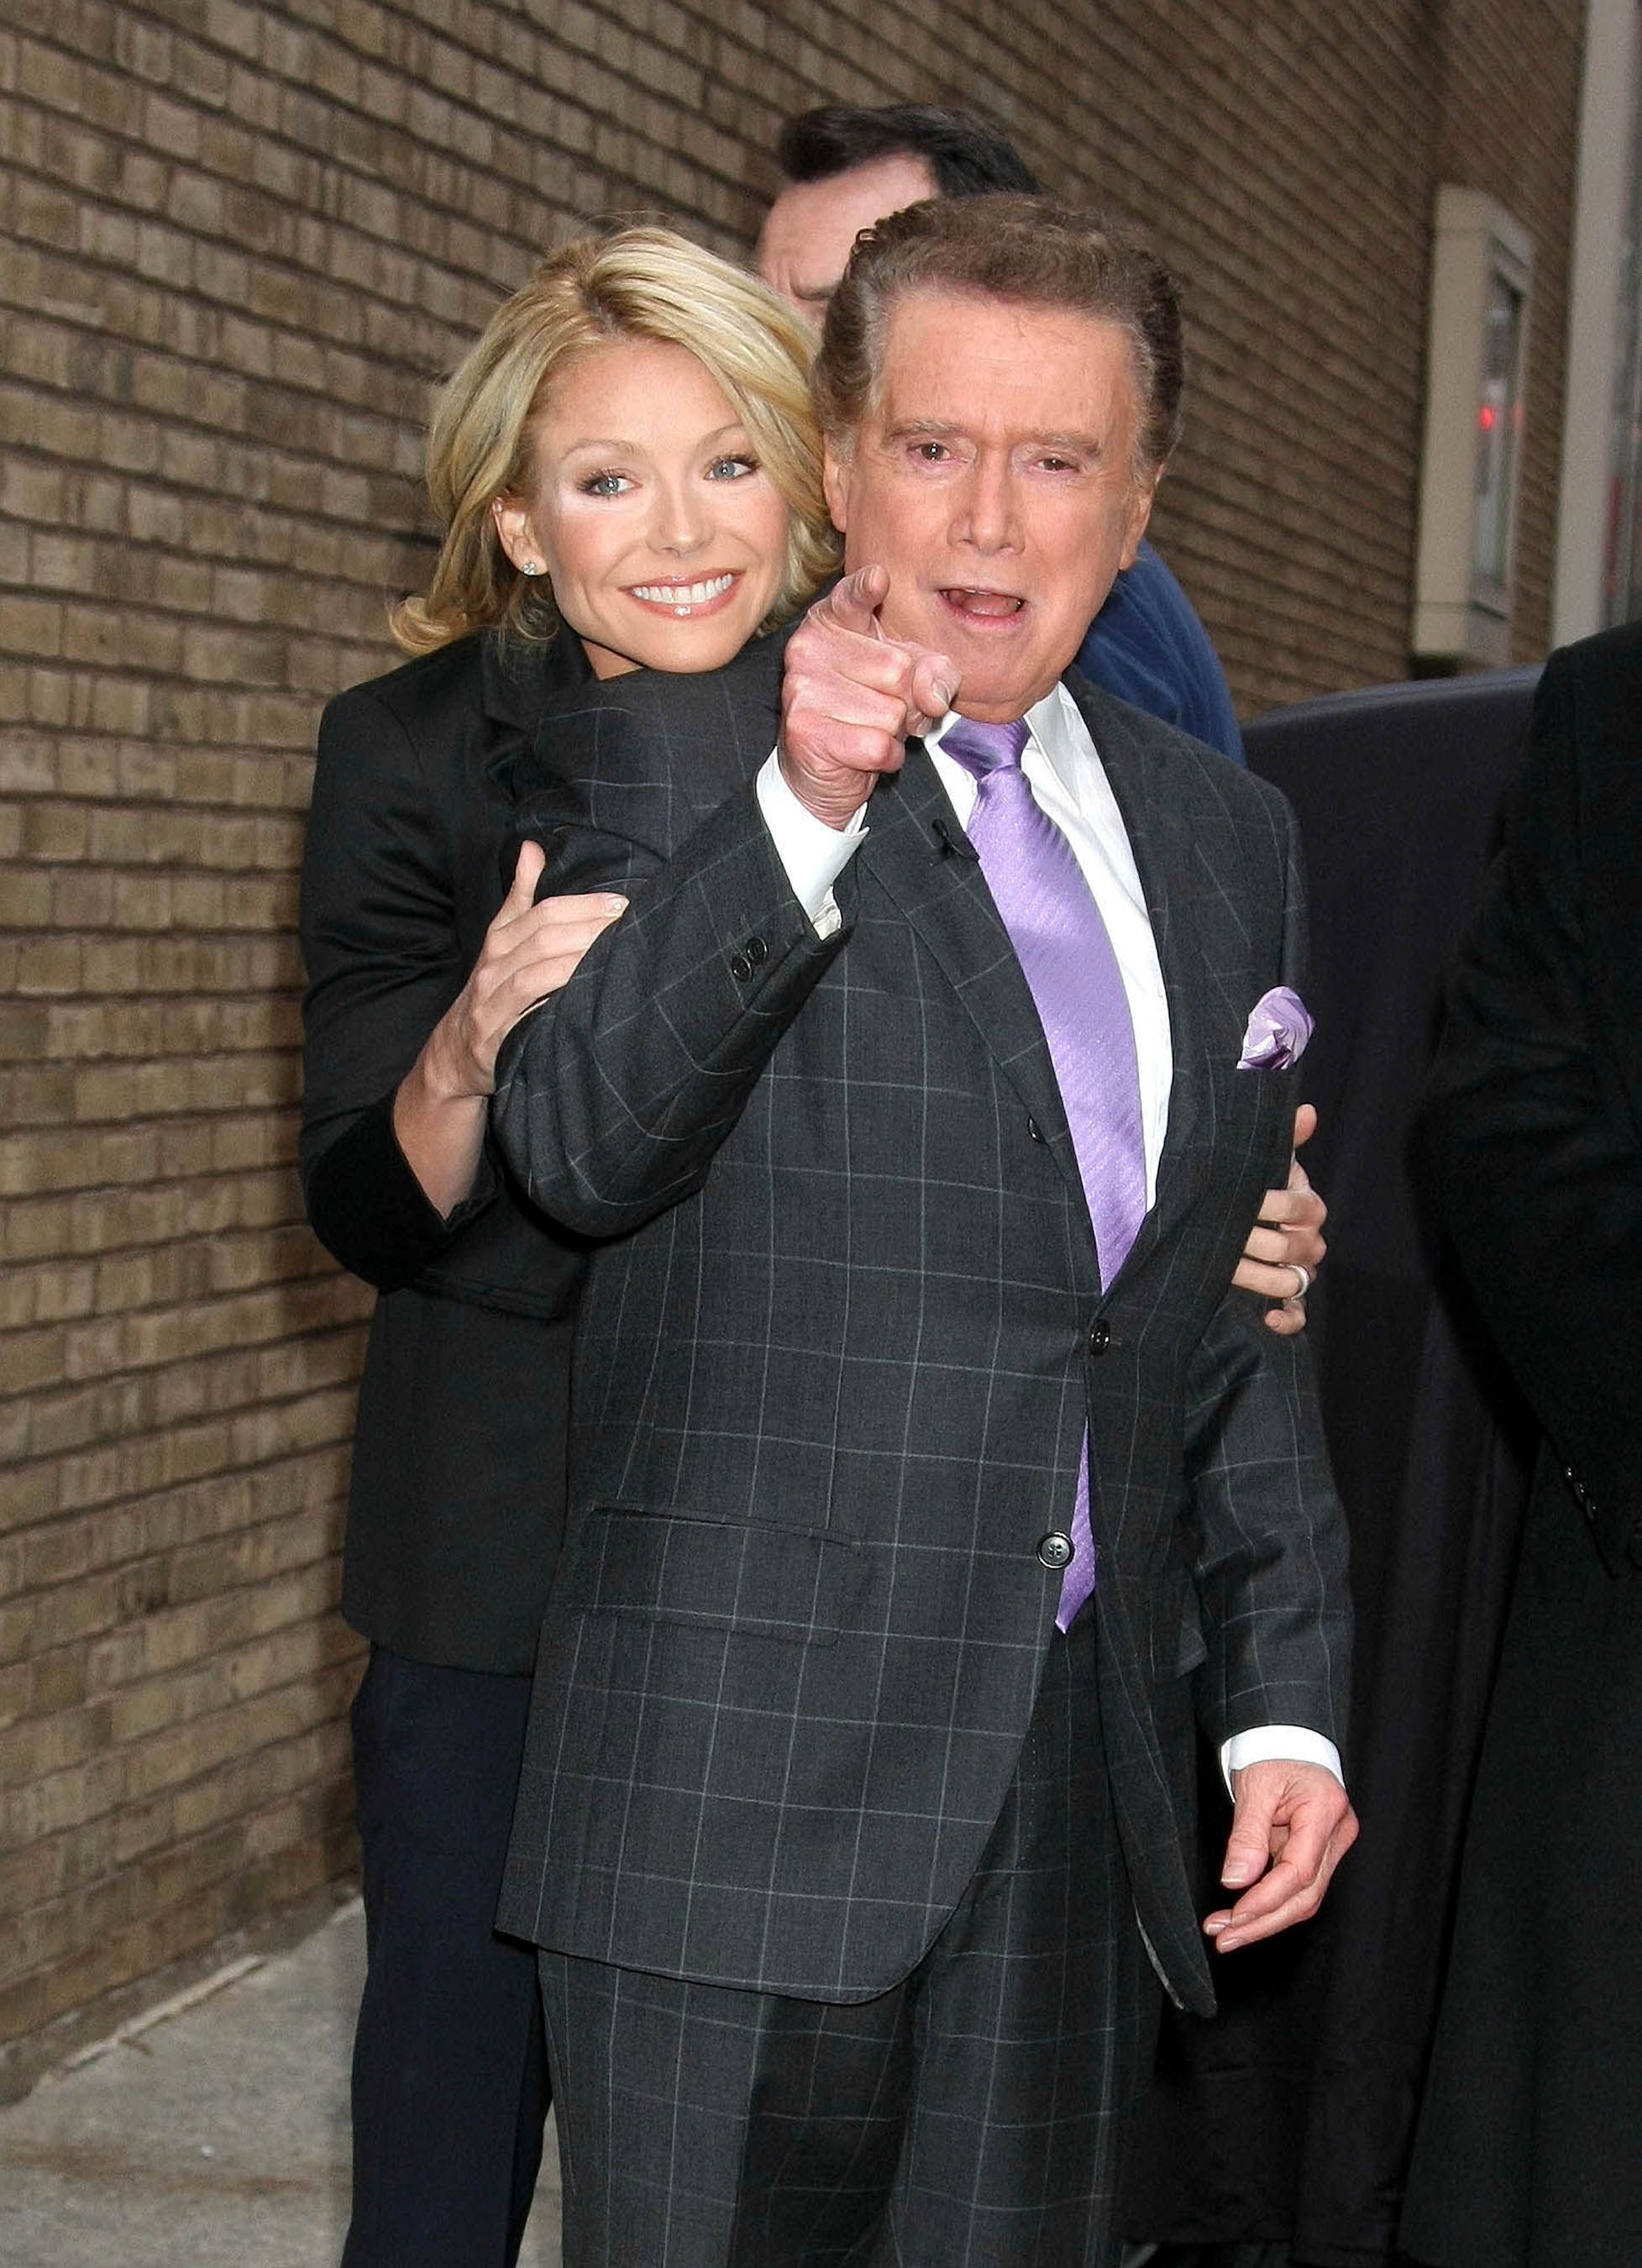 Regis Philbin Took A Shot At Kelly Ripa Backstage Prior To Her First Show